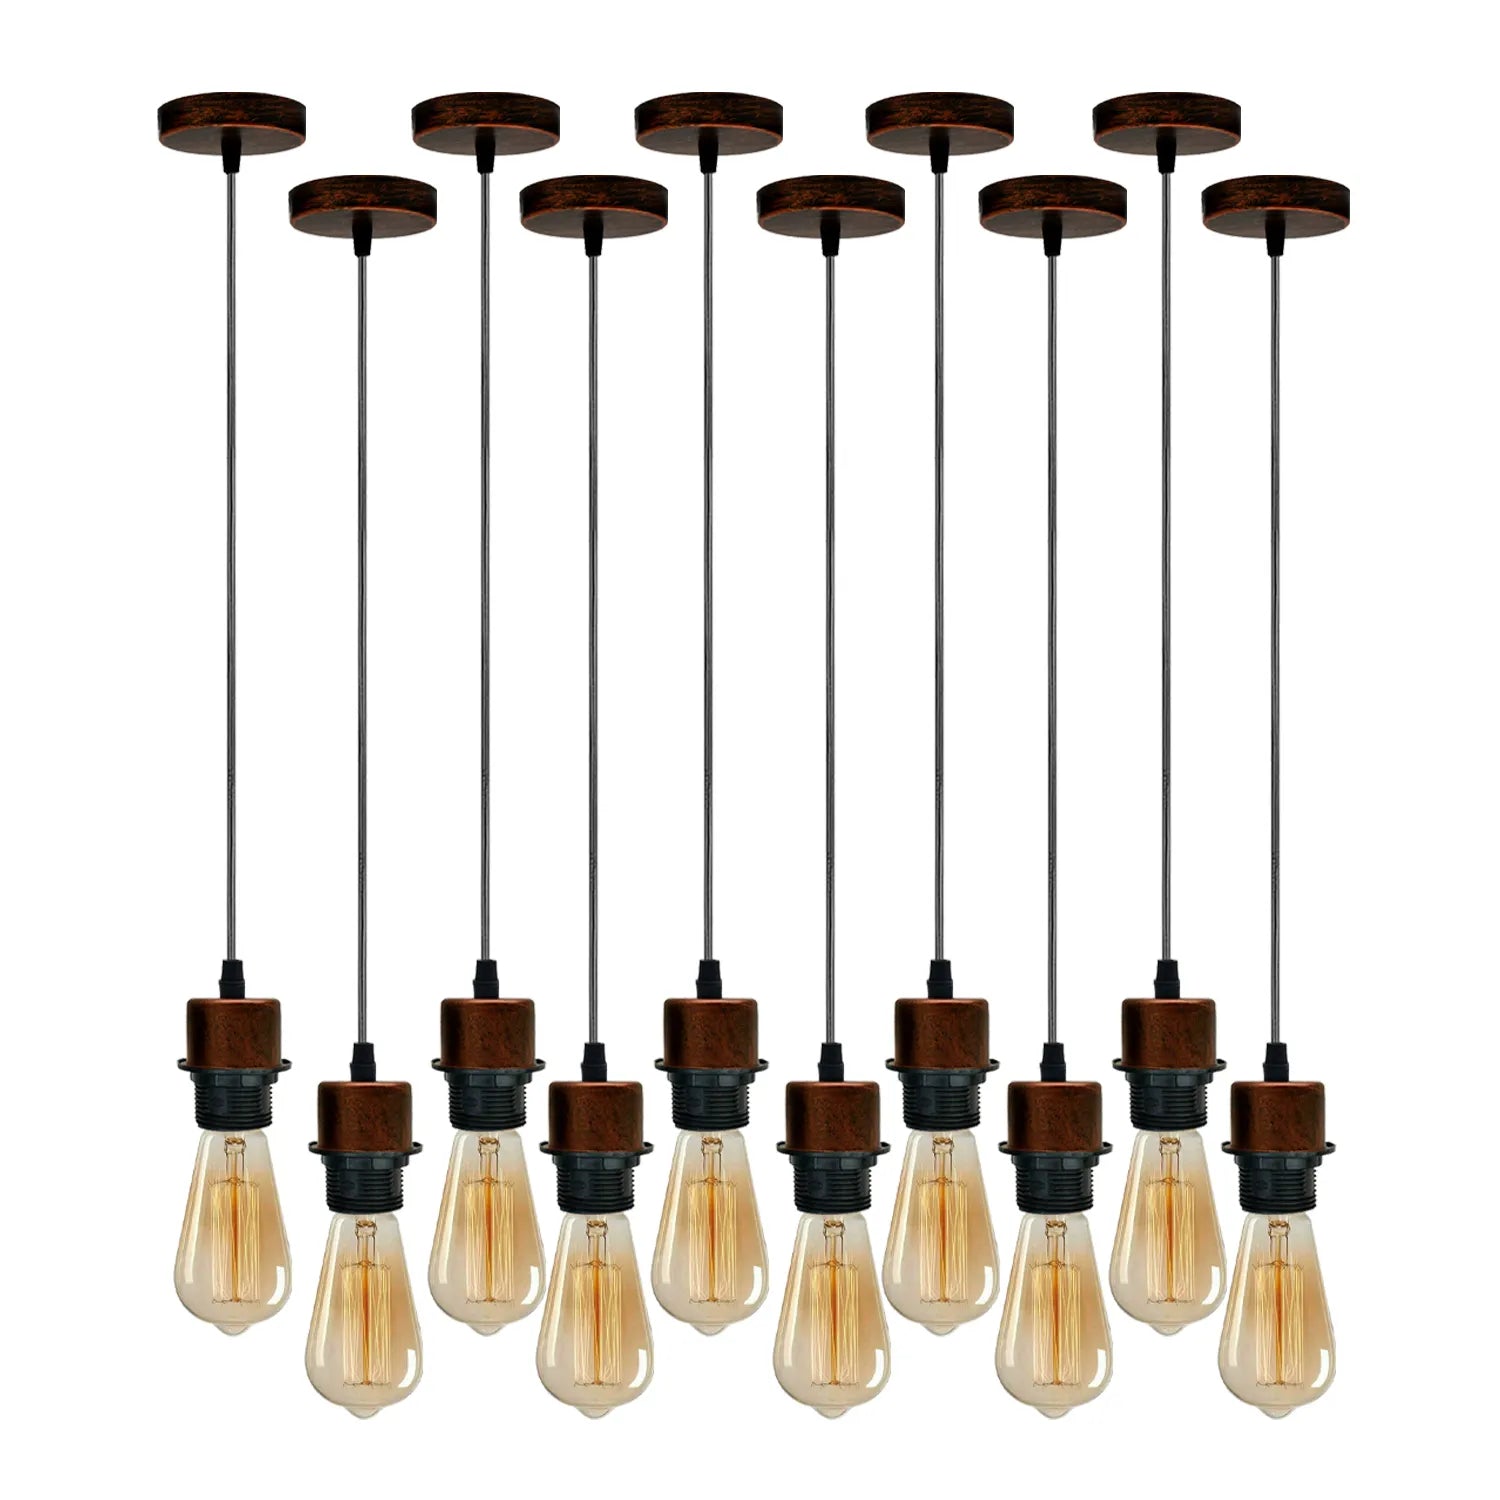 10Pack Rustic Red Pendant Light,E27 Lamp Holder Hanging Light,PVC Cable~4248